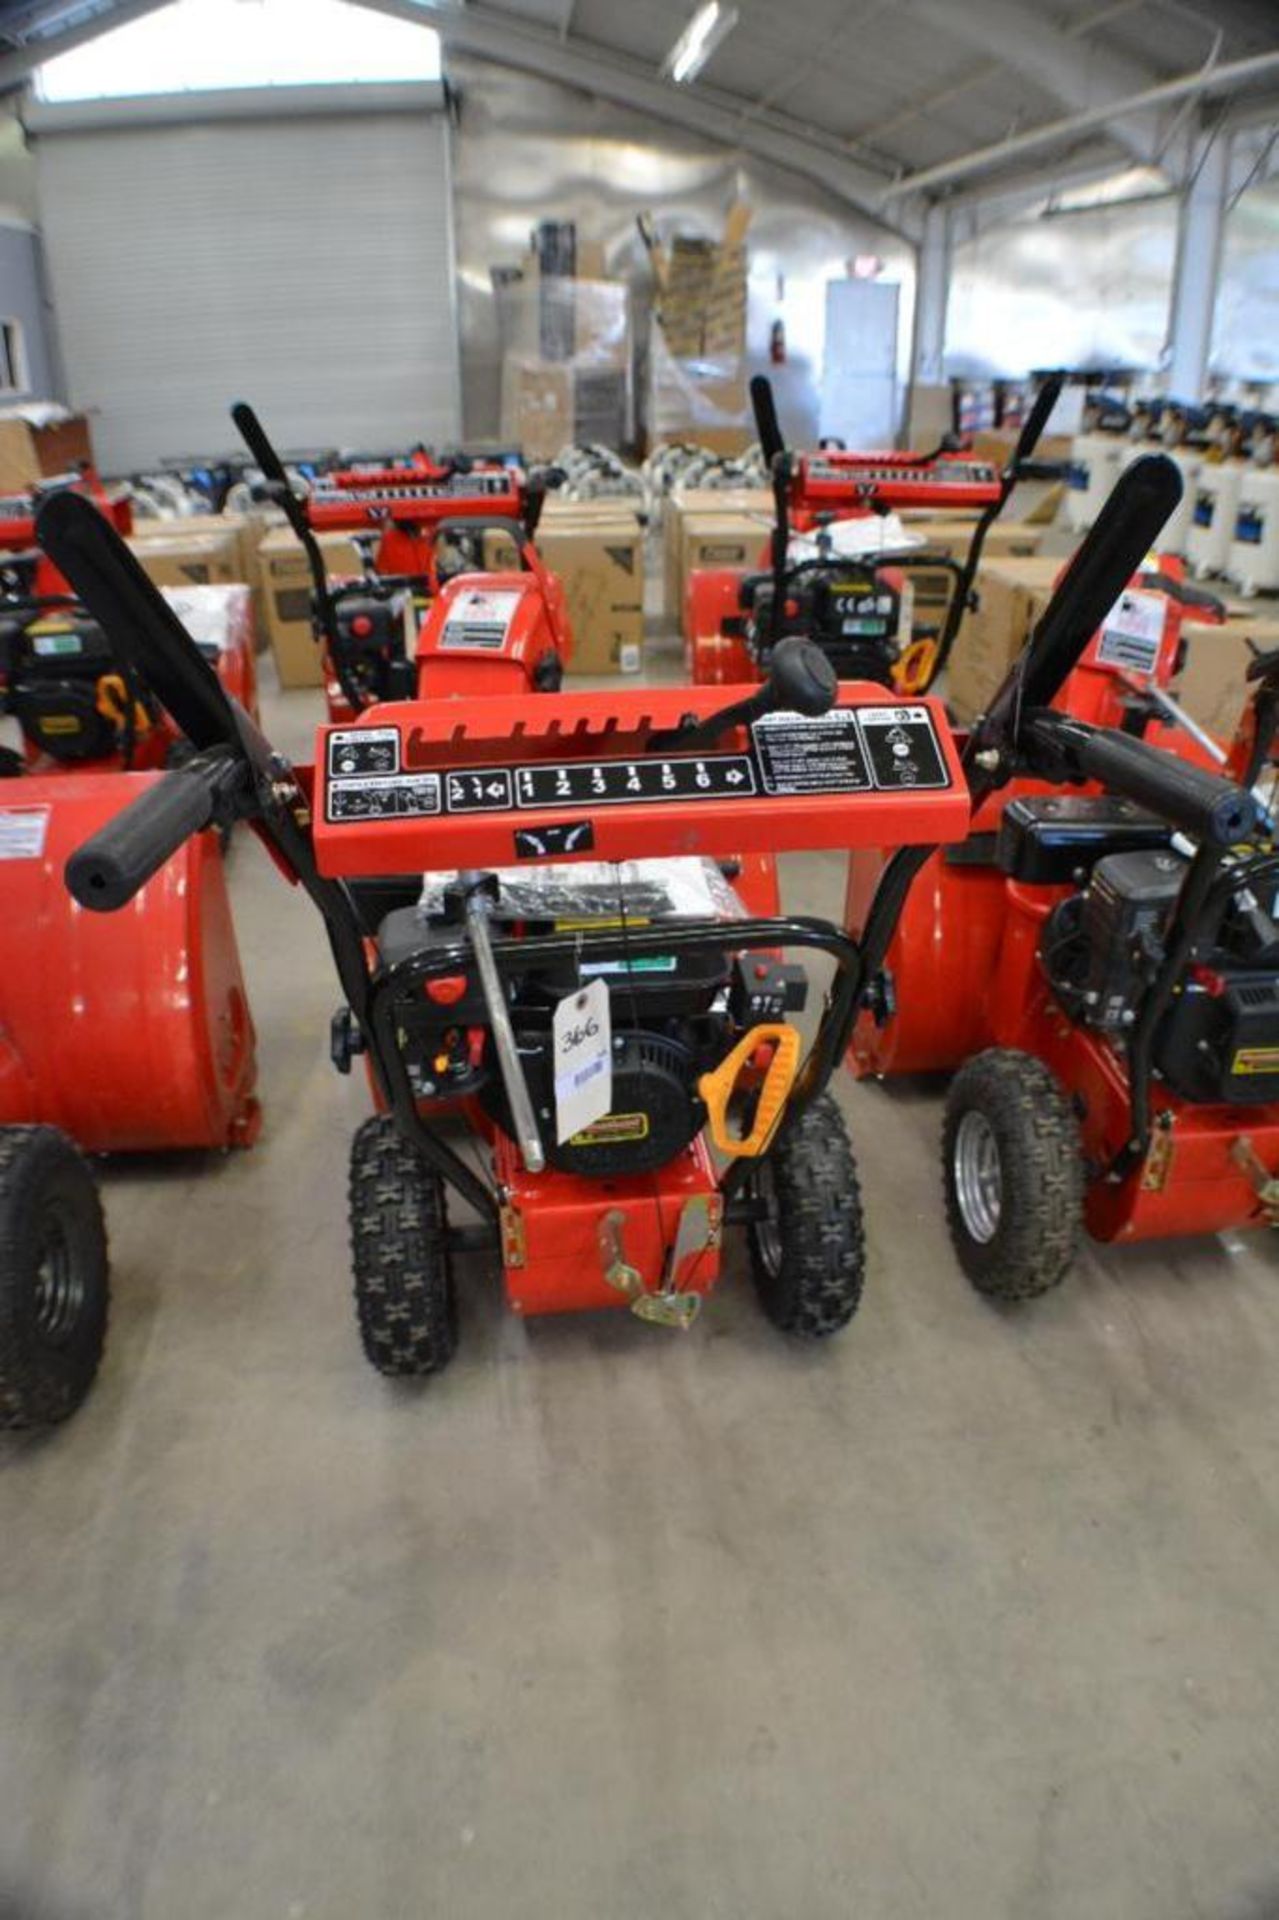 Snow Thrower 24in. 6.5HP with electric Start Engine 4 Stroke by Powerland - Image 6 of 6